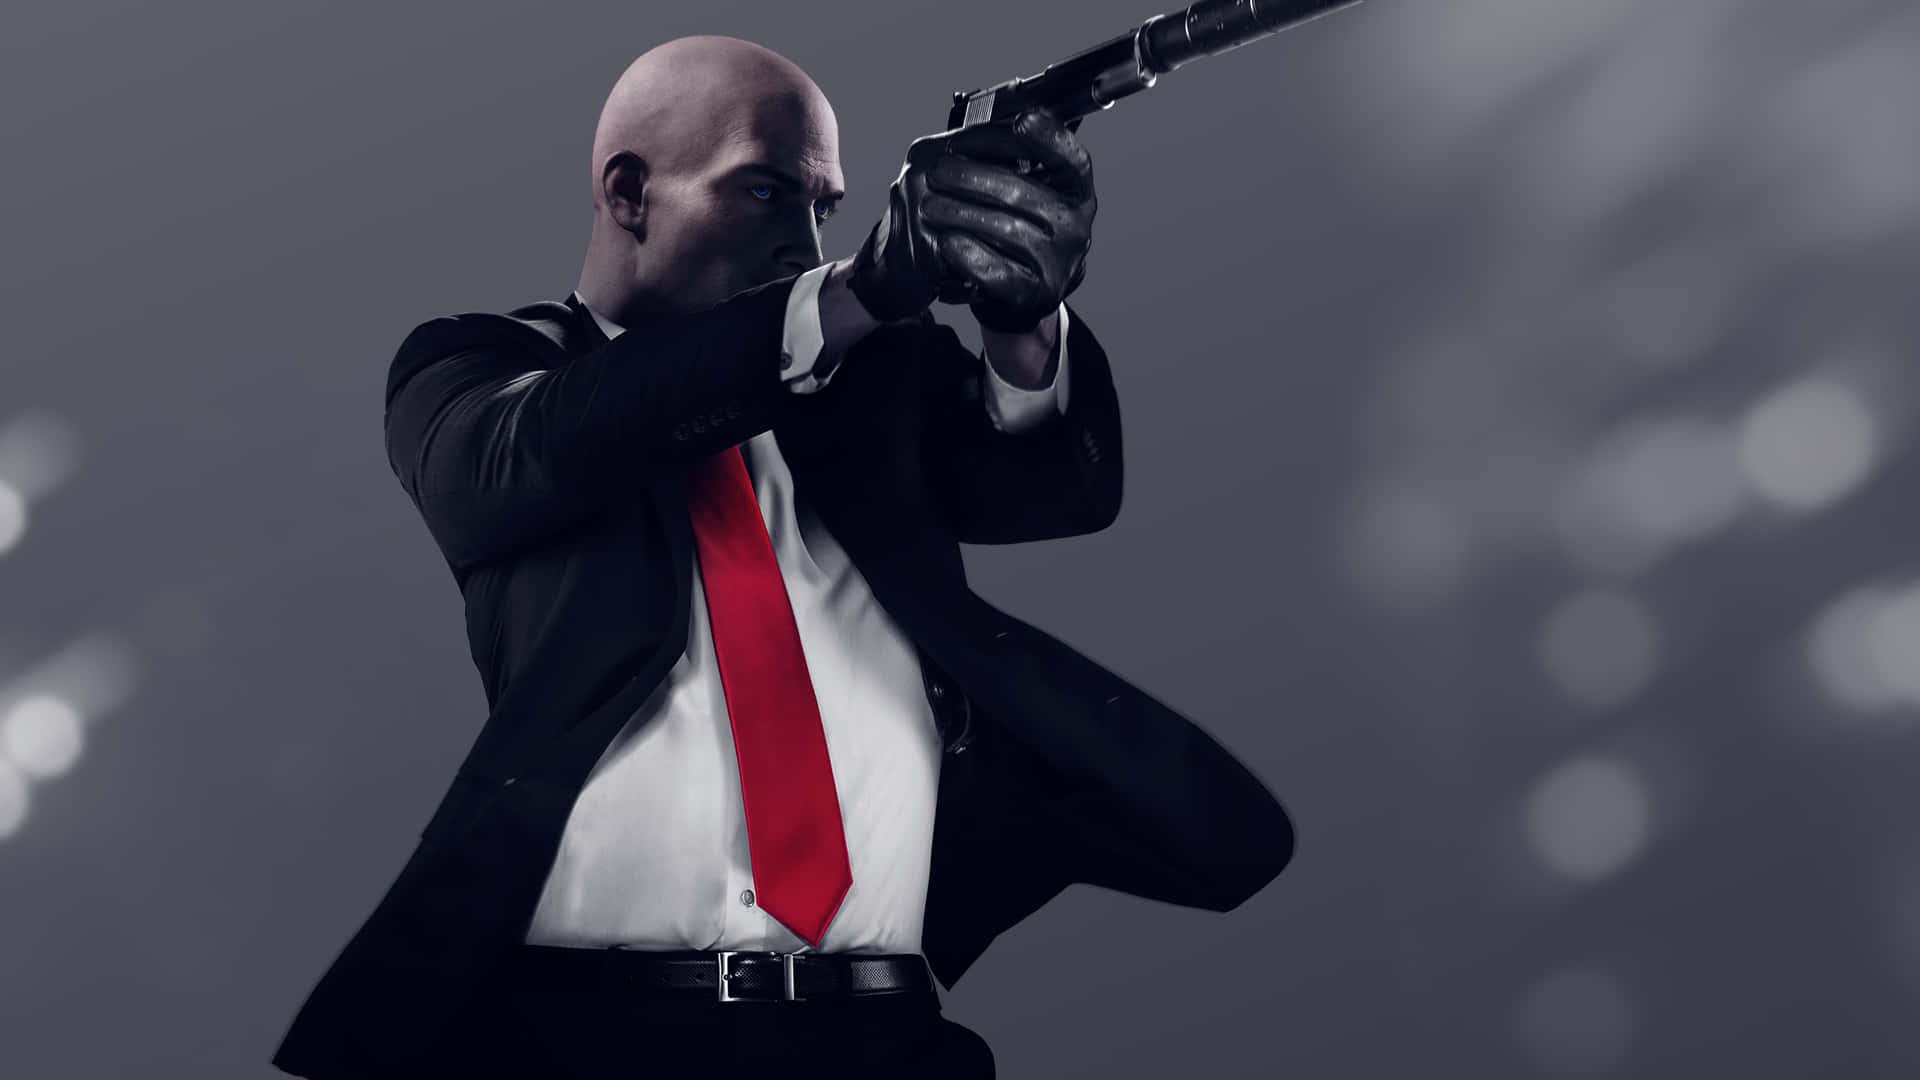 Agent 47 - Ready for Action